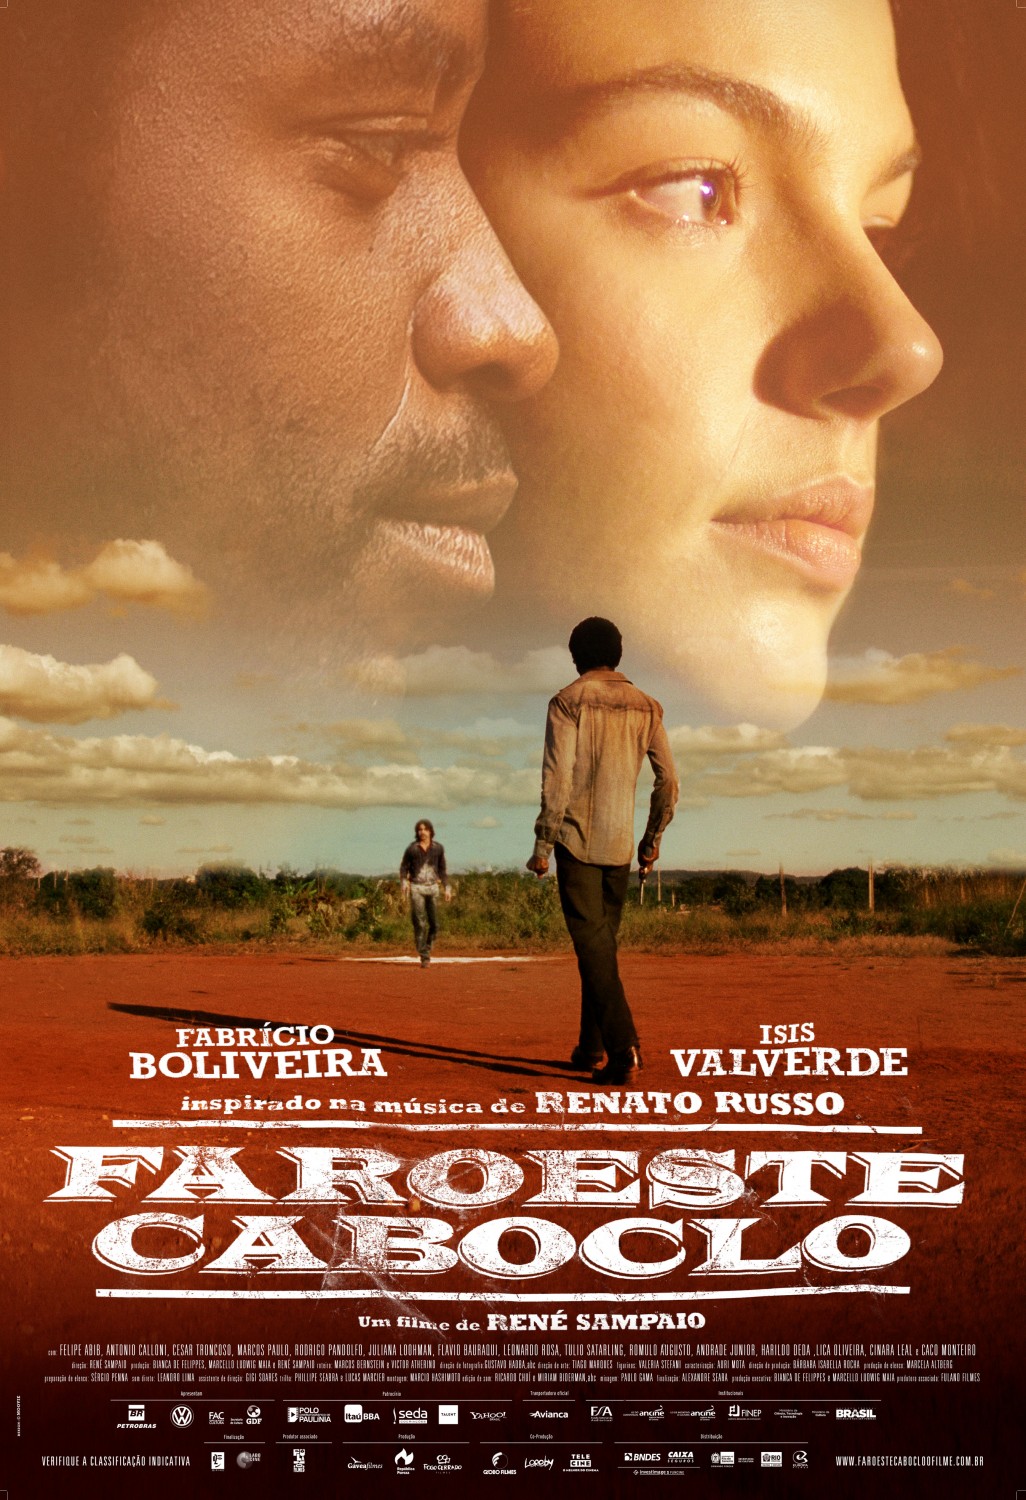 Extra Large Movie Poster Image for Faroeste caboclo 